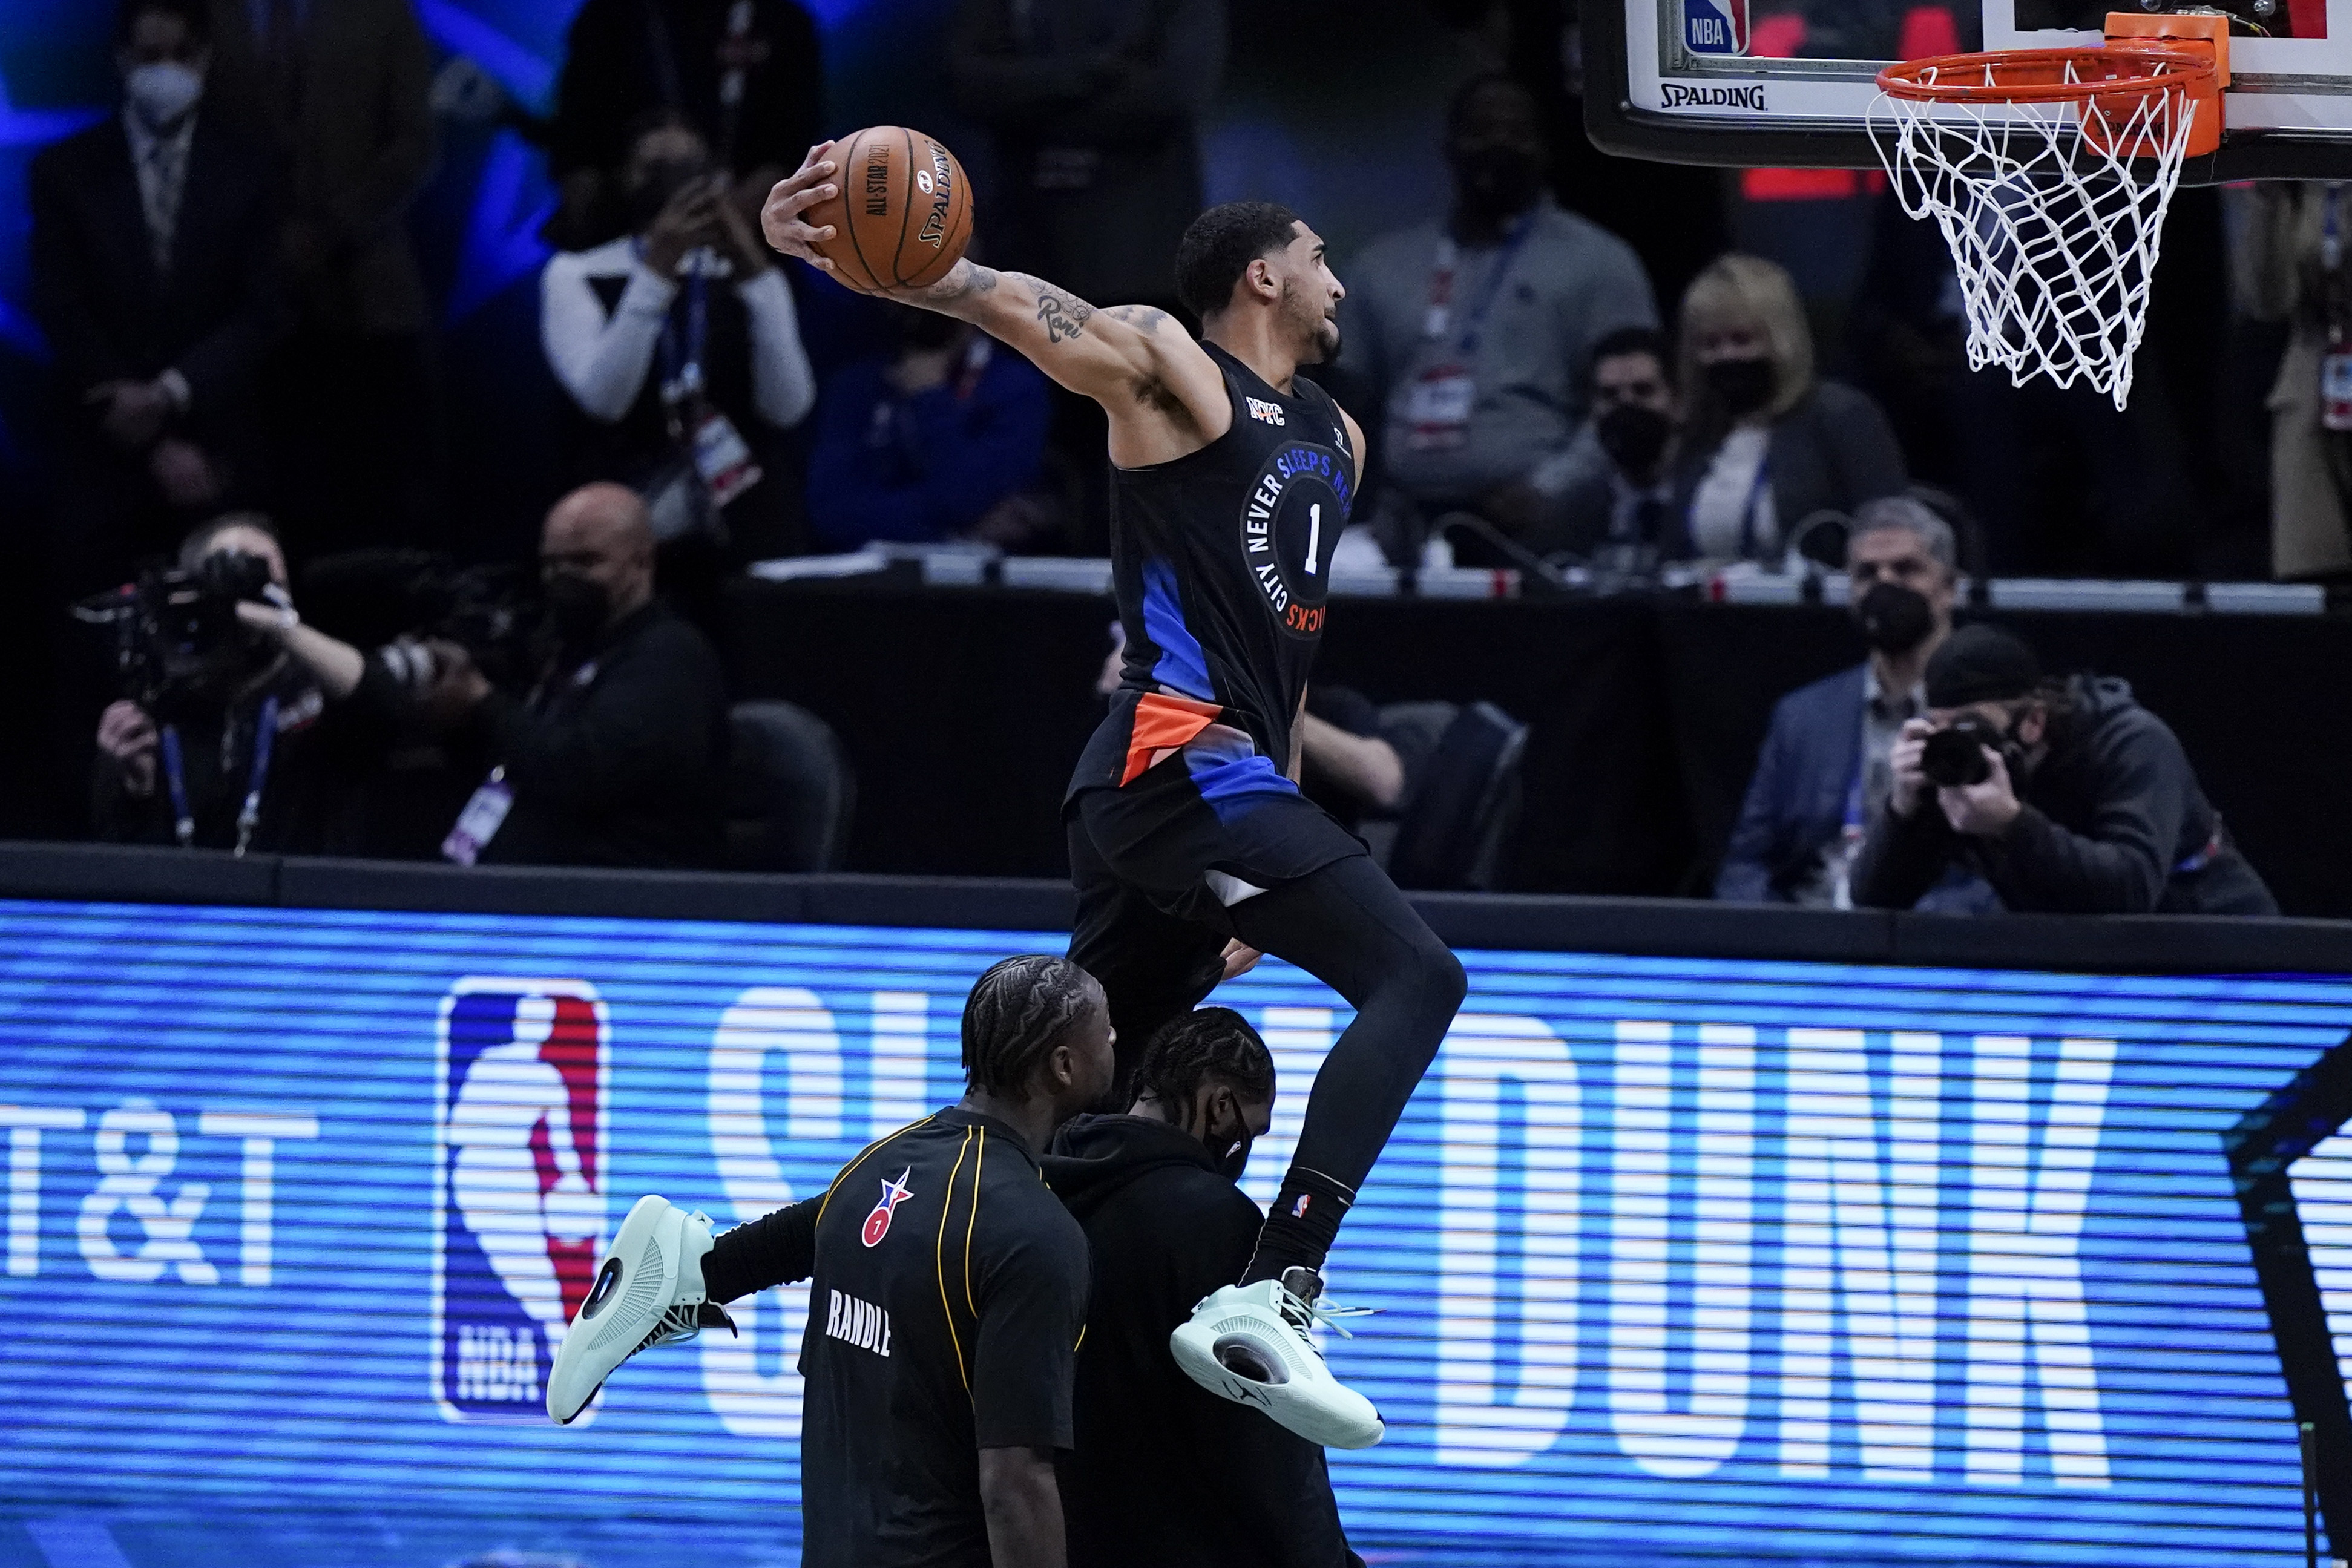 How to watch NBA All-Star Saturday Night (2/19/22) Live stream, time, TV, channel for 3-point contest, dunk contest, skills challenge